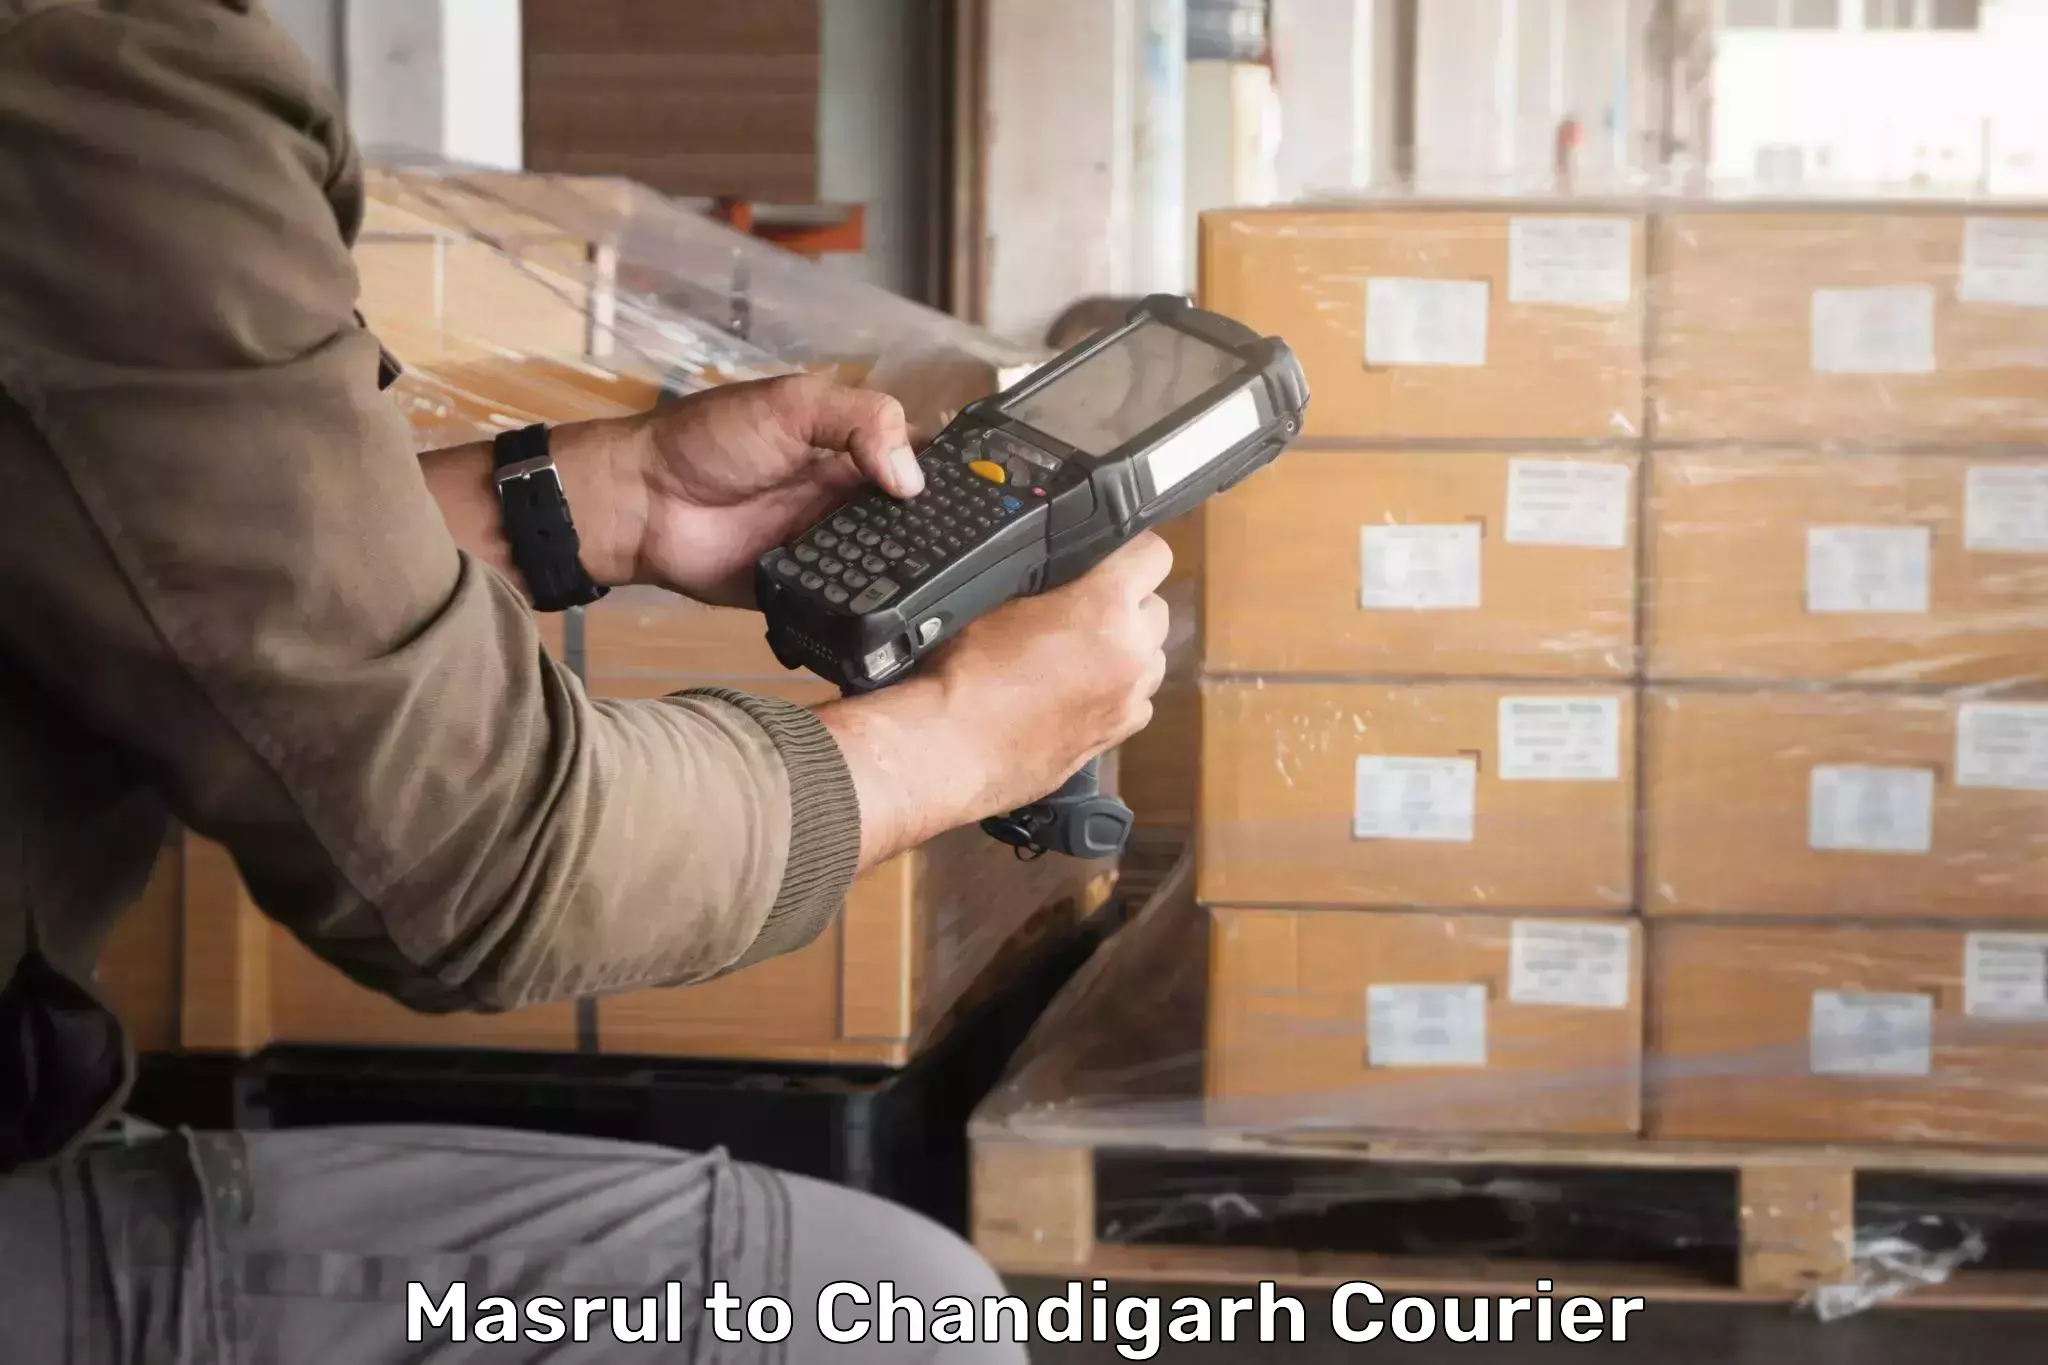 Multi-national courier services Masrul to Chandigarh